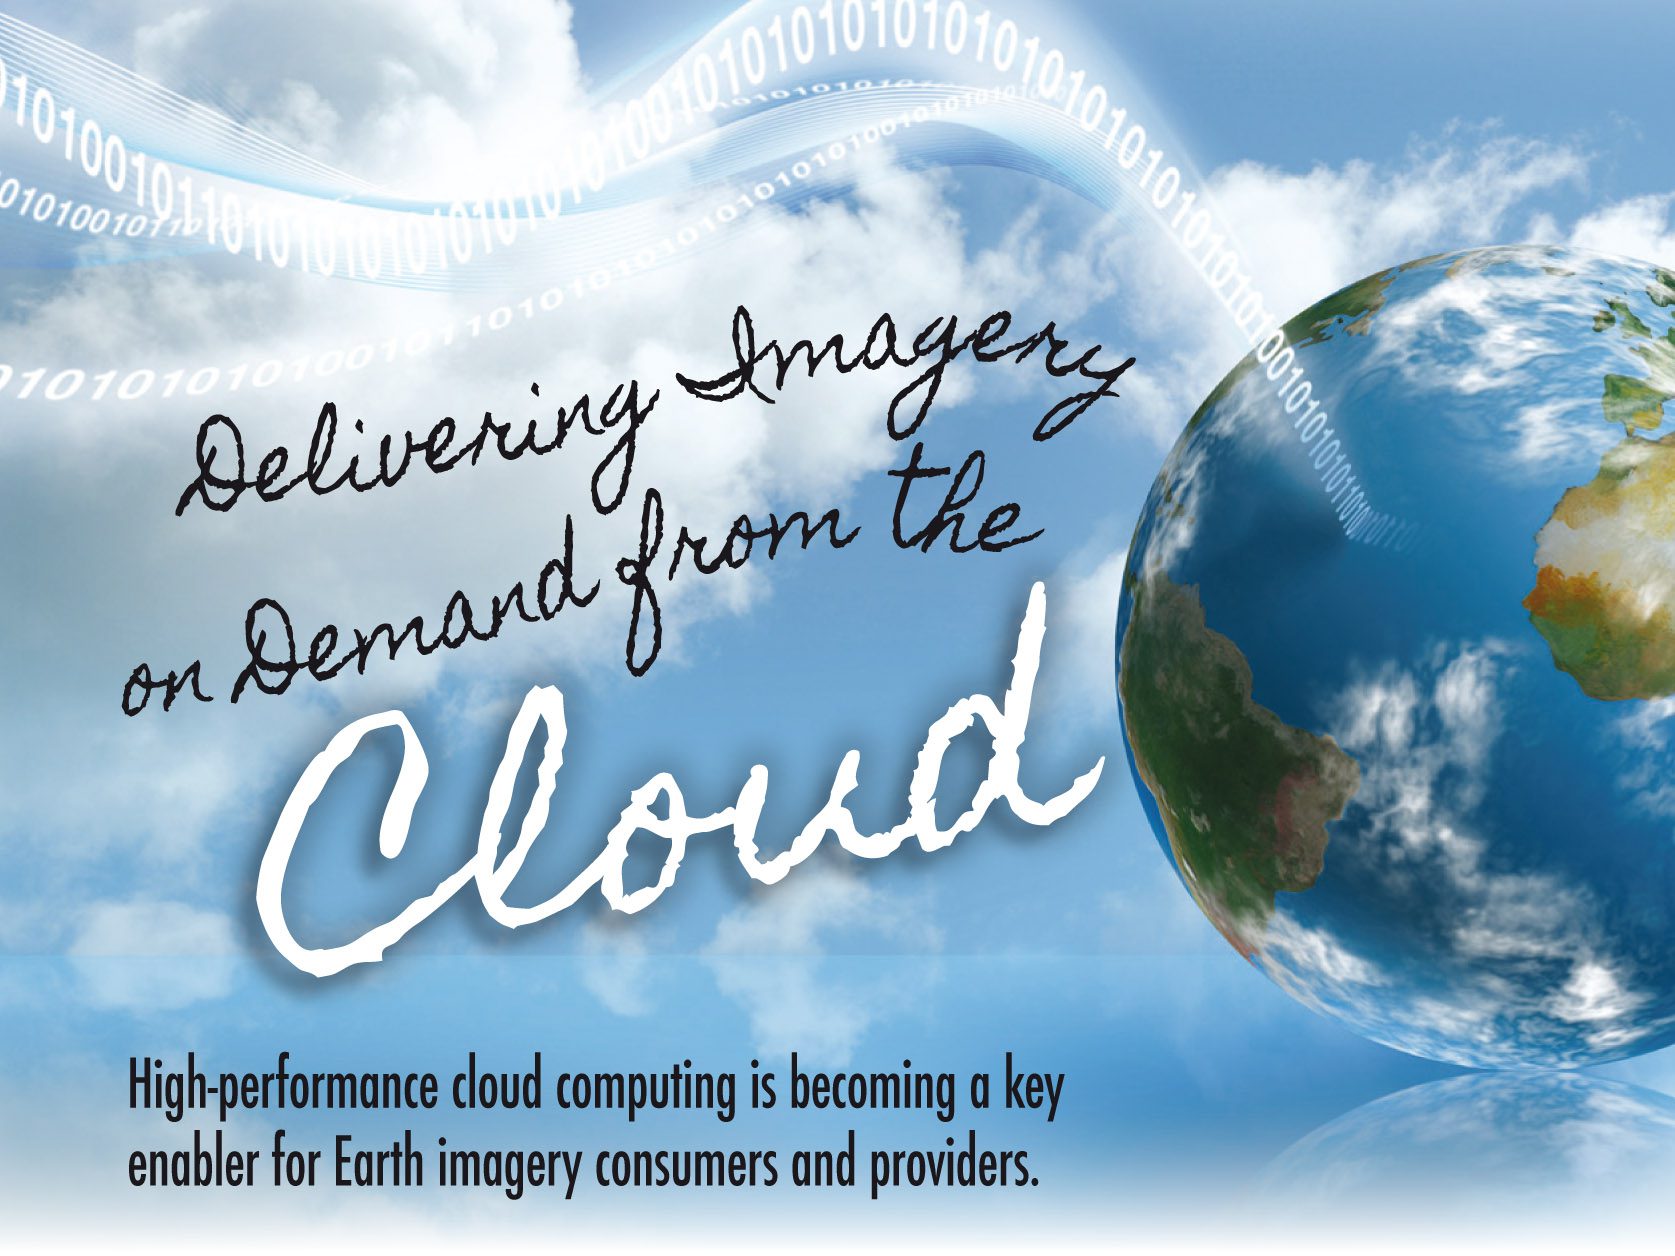 Delivering Imagery on Demand from the Cloud